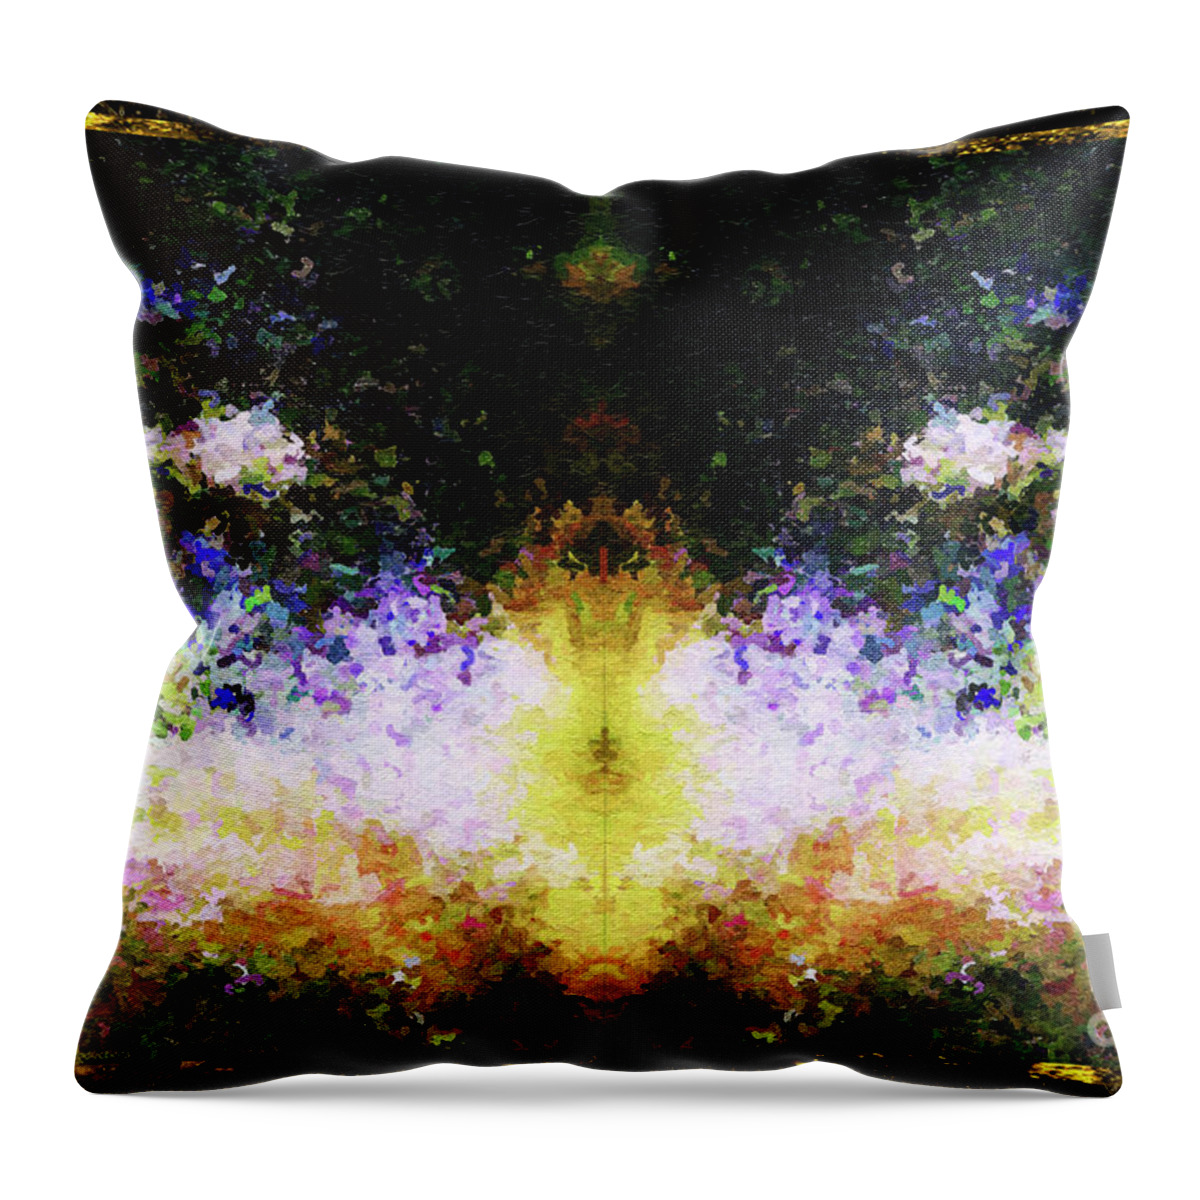 Chromatic Poetics Throw Pillow featuring the painting That Time We Woke Up Laughing in Claude Monet's Garden by Aberjhani